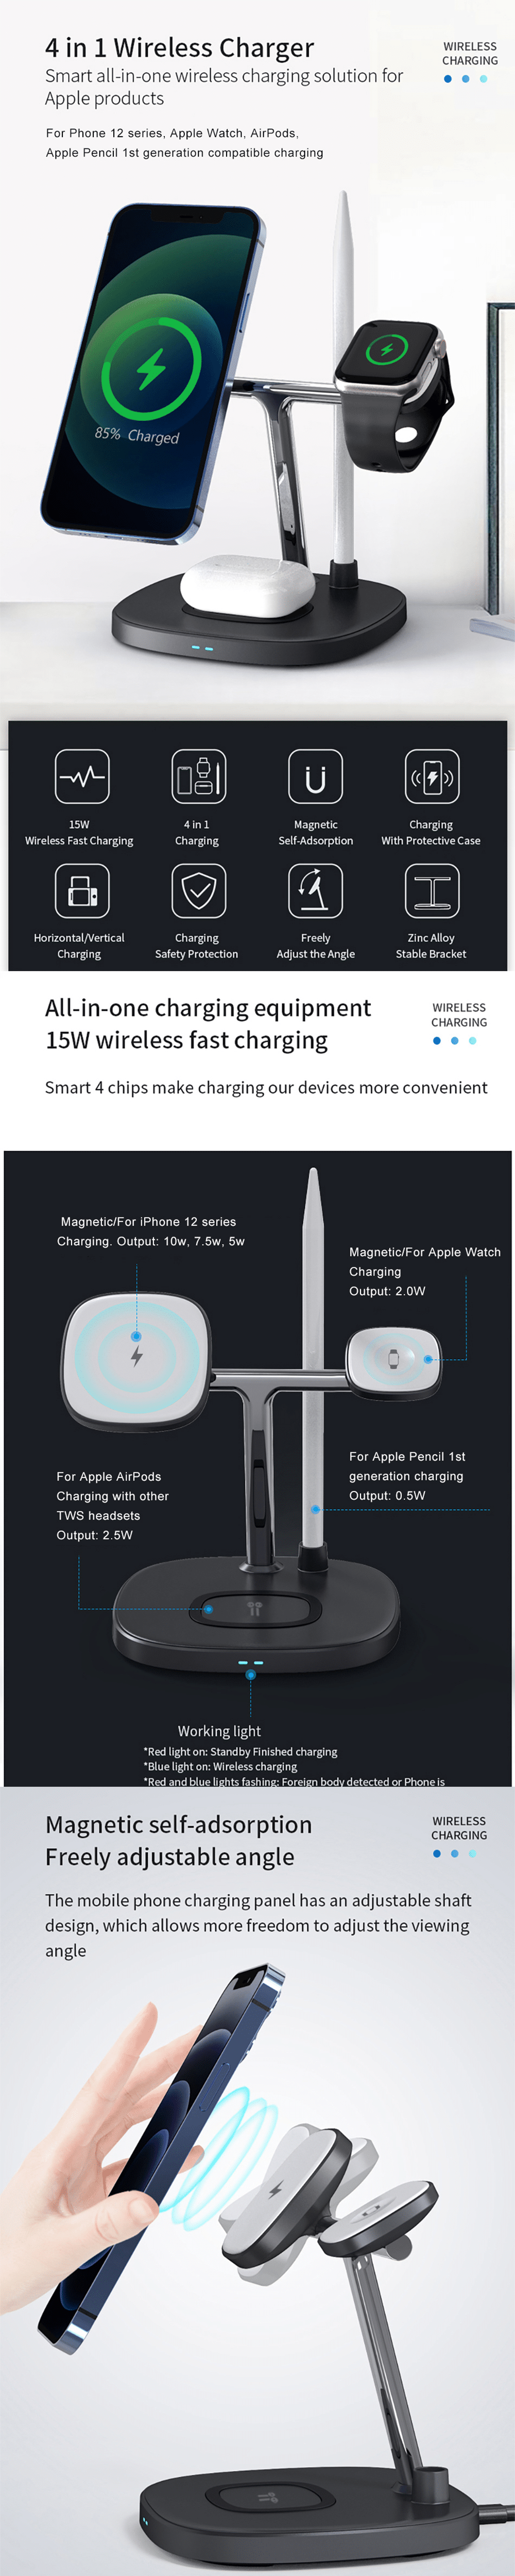 WiWU M8 Power Air 15W 4 in 1 Wireless Charger 3